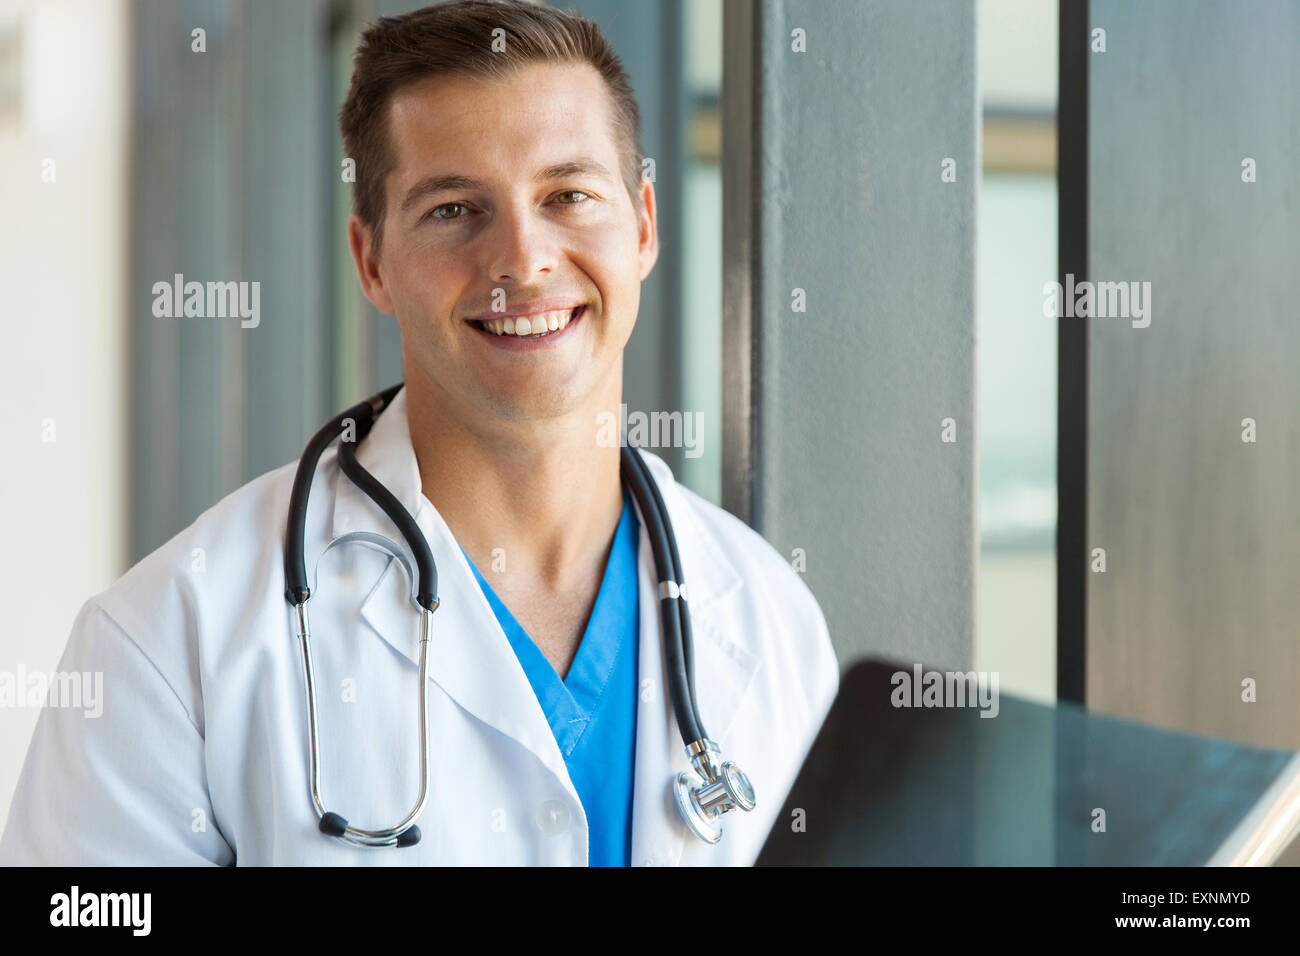 Smiling medical professional with stethoscope Banque D'Images